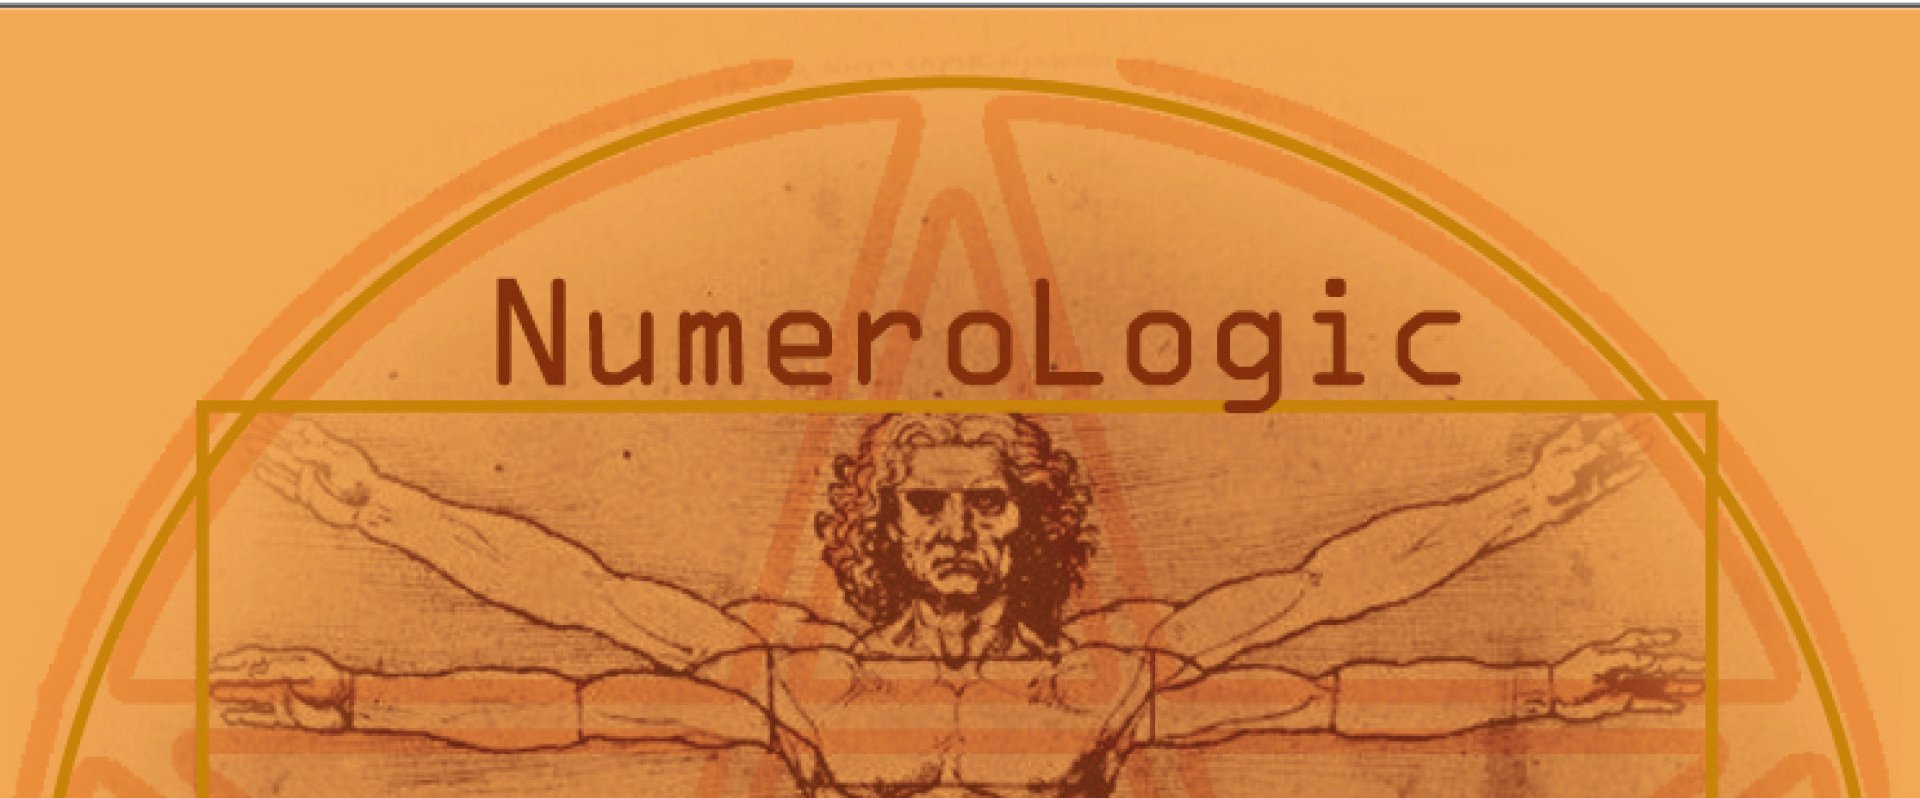 NumeroLogical Day Analysis: 20-5-2020  11/2  Master Number; Genius or Madness/ Intuition or Doubt